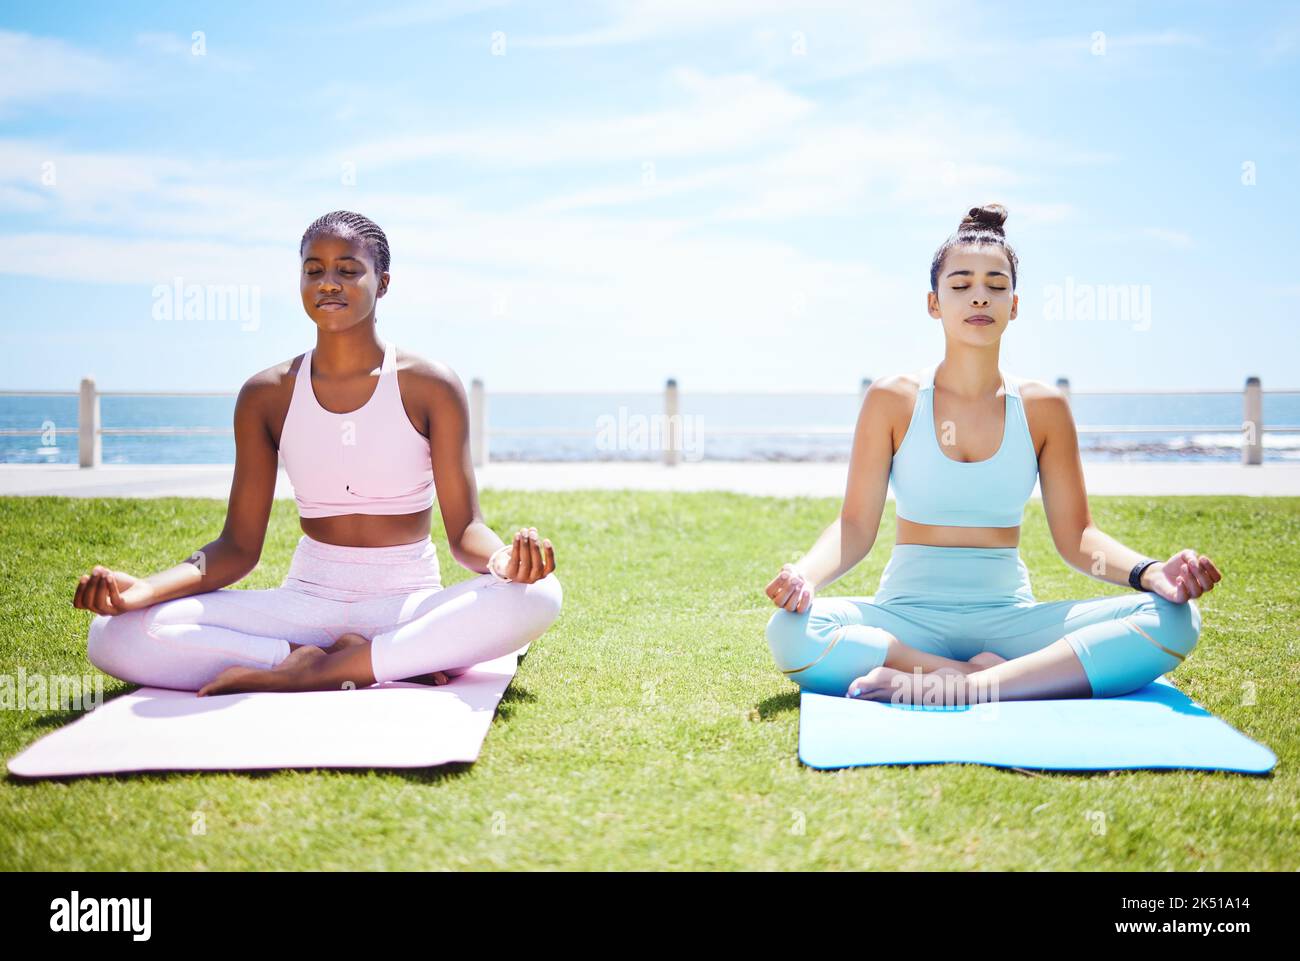 Women yoga meditation, peace and mudra hands in lotus pose for nature exercise, workout and zen energy outdoor grass. Calm, fitness and focus friends Stock Photo